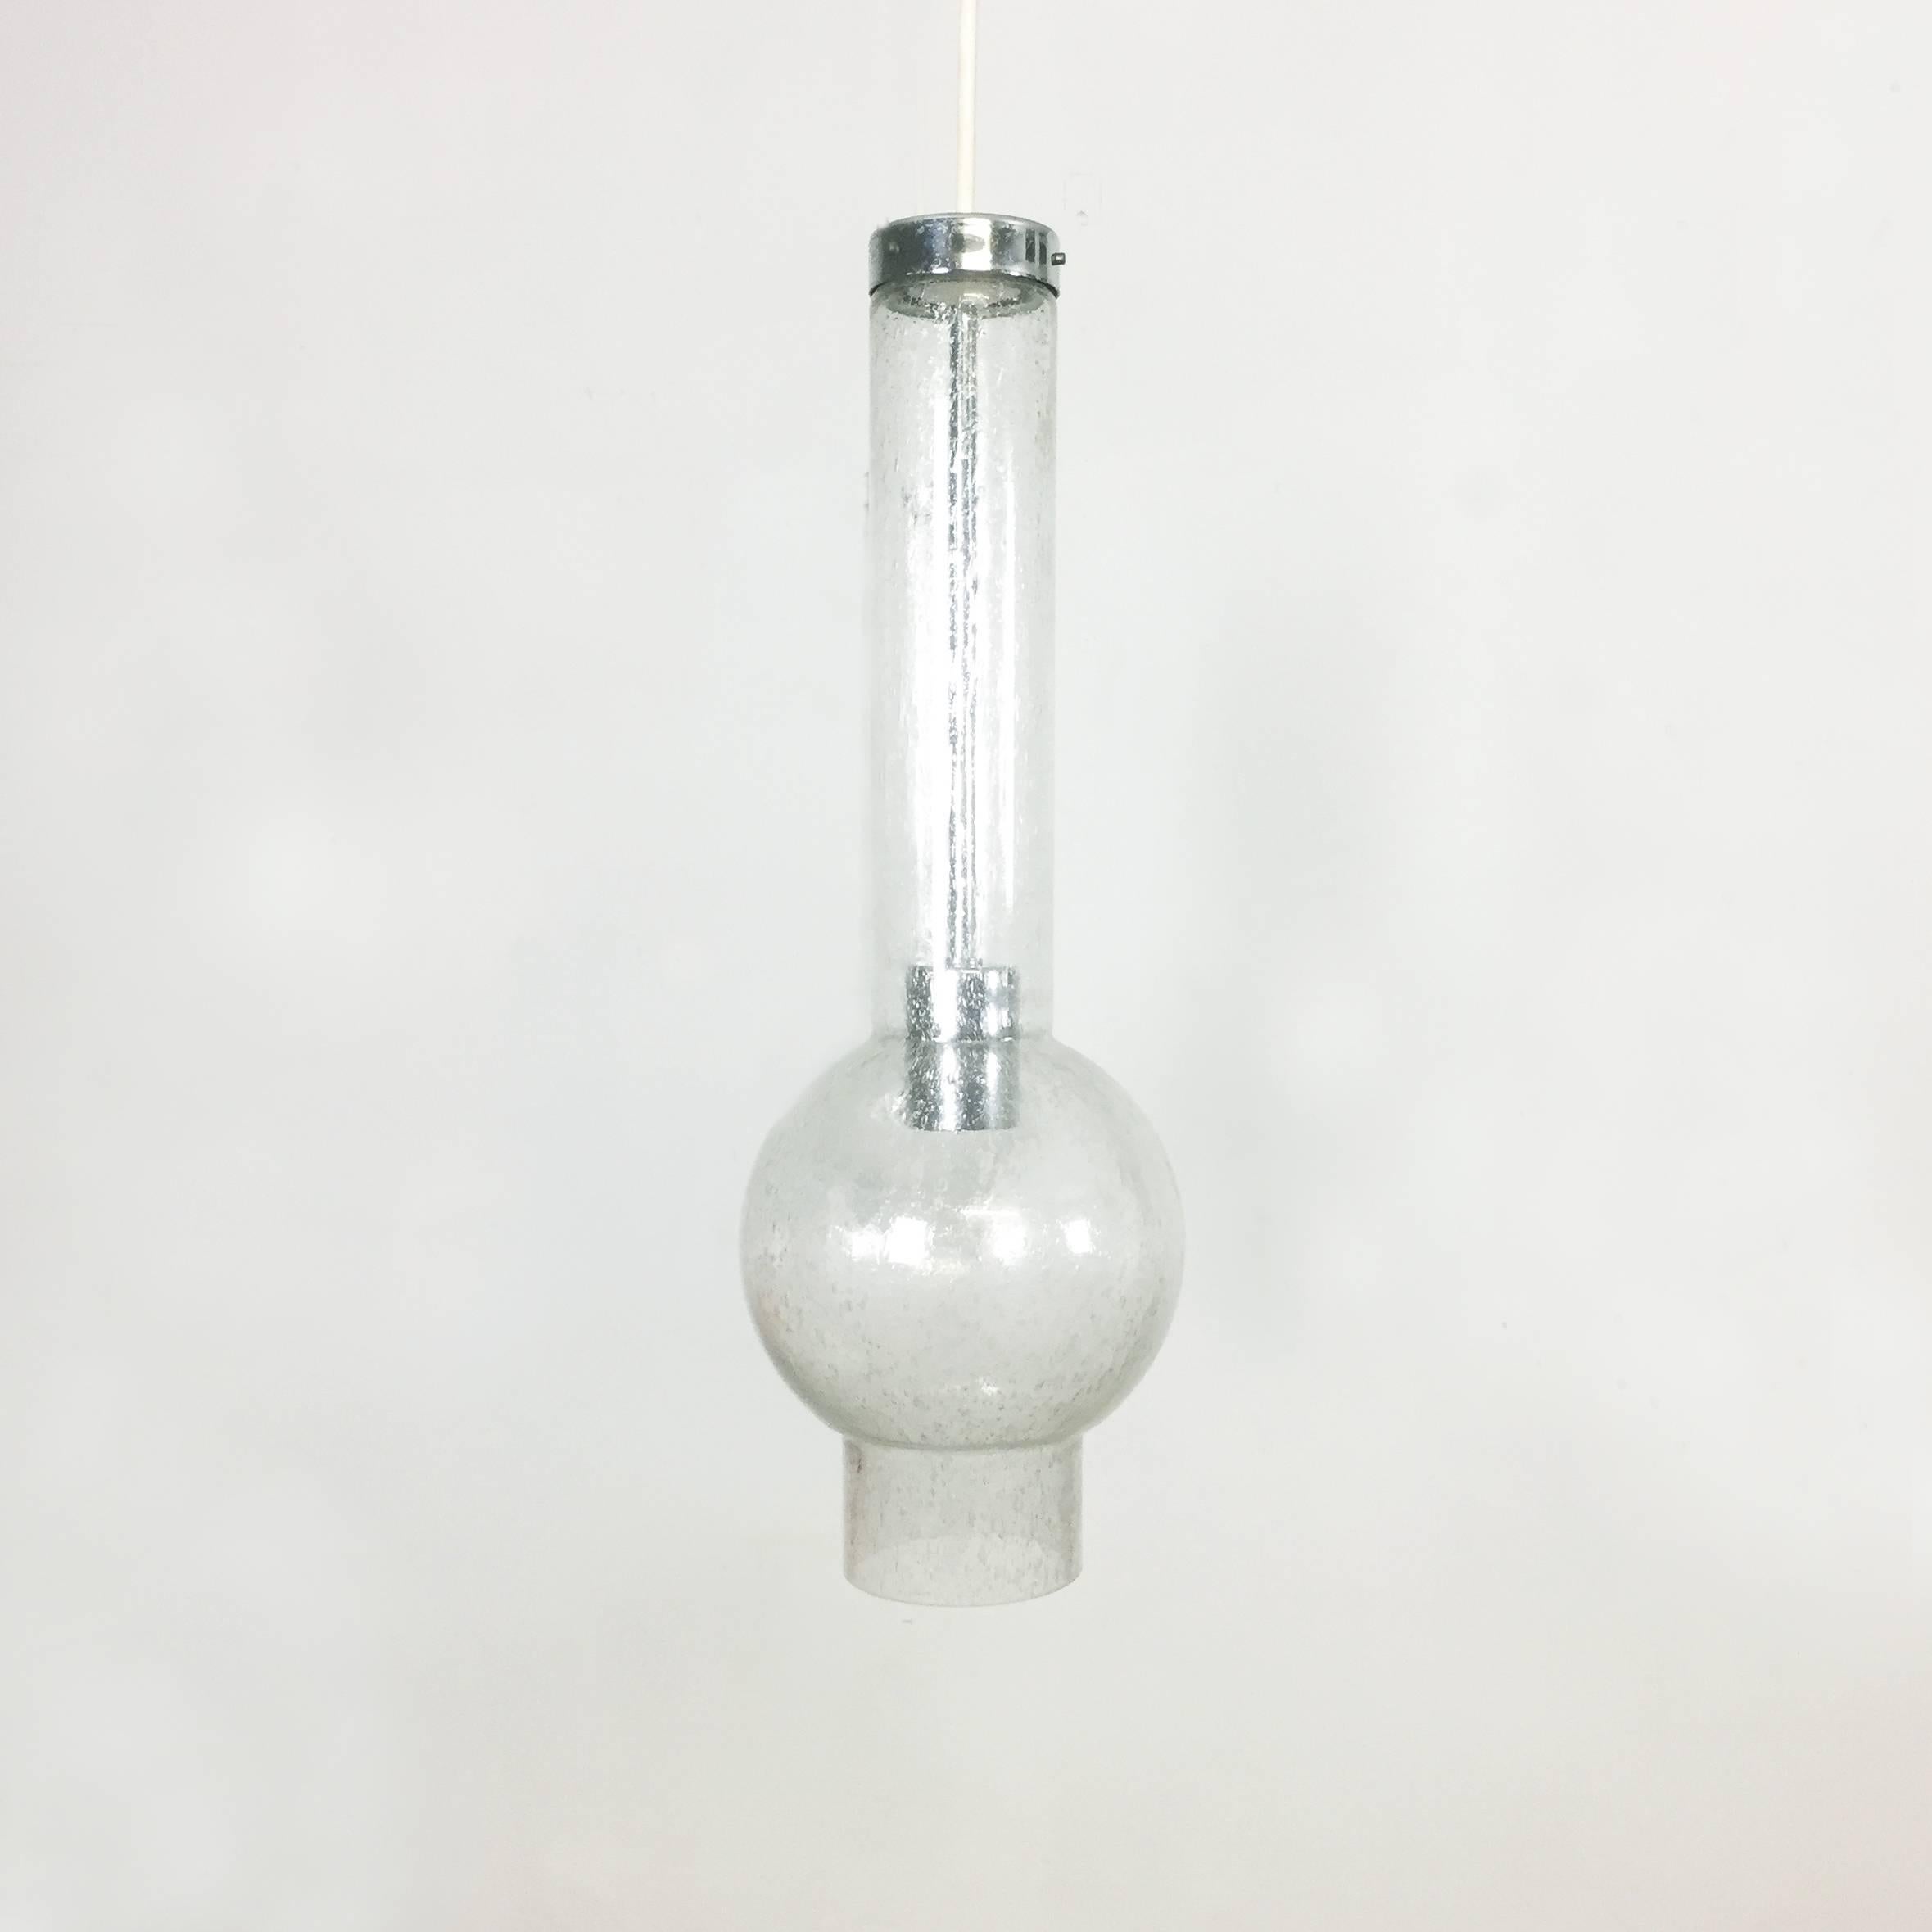 1 of 3 Handblown Glass Tube Light Made by Staff Lights 1970s, Germany 2